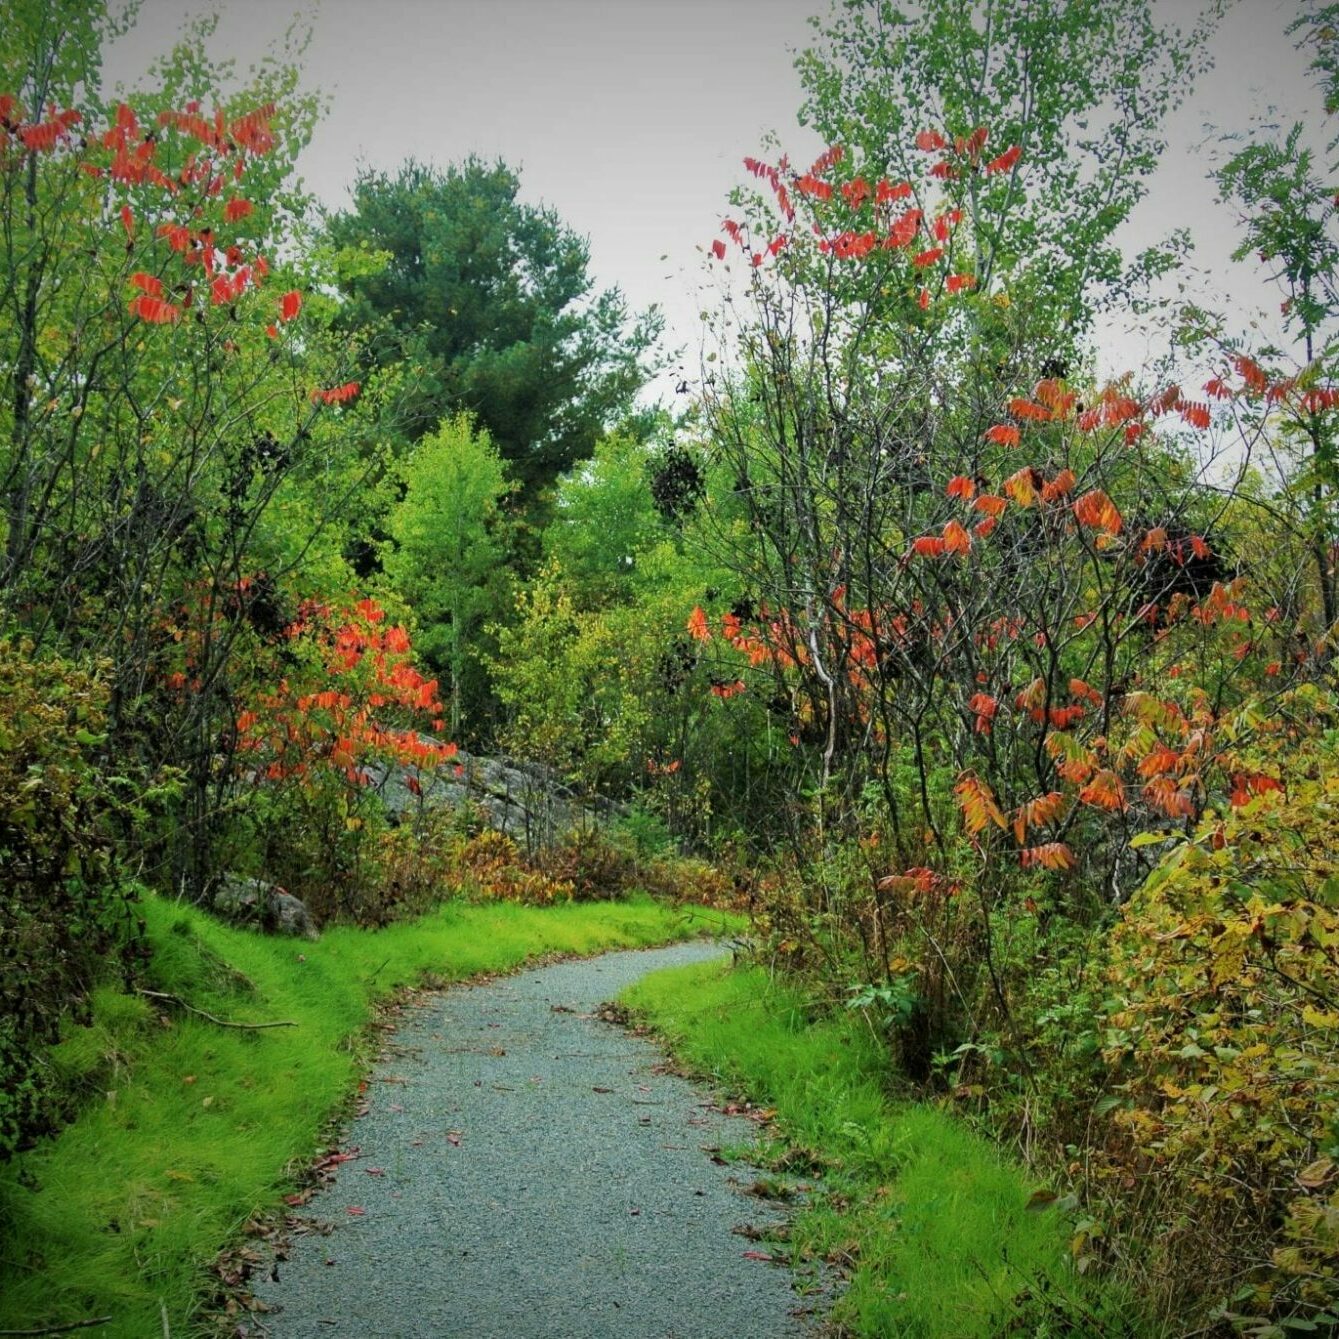 Winding trail through lush green forest with red foliage.